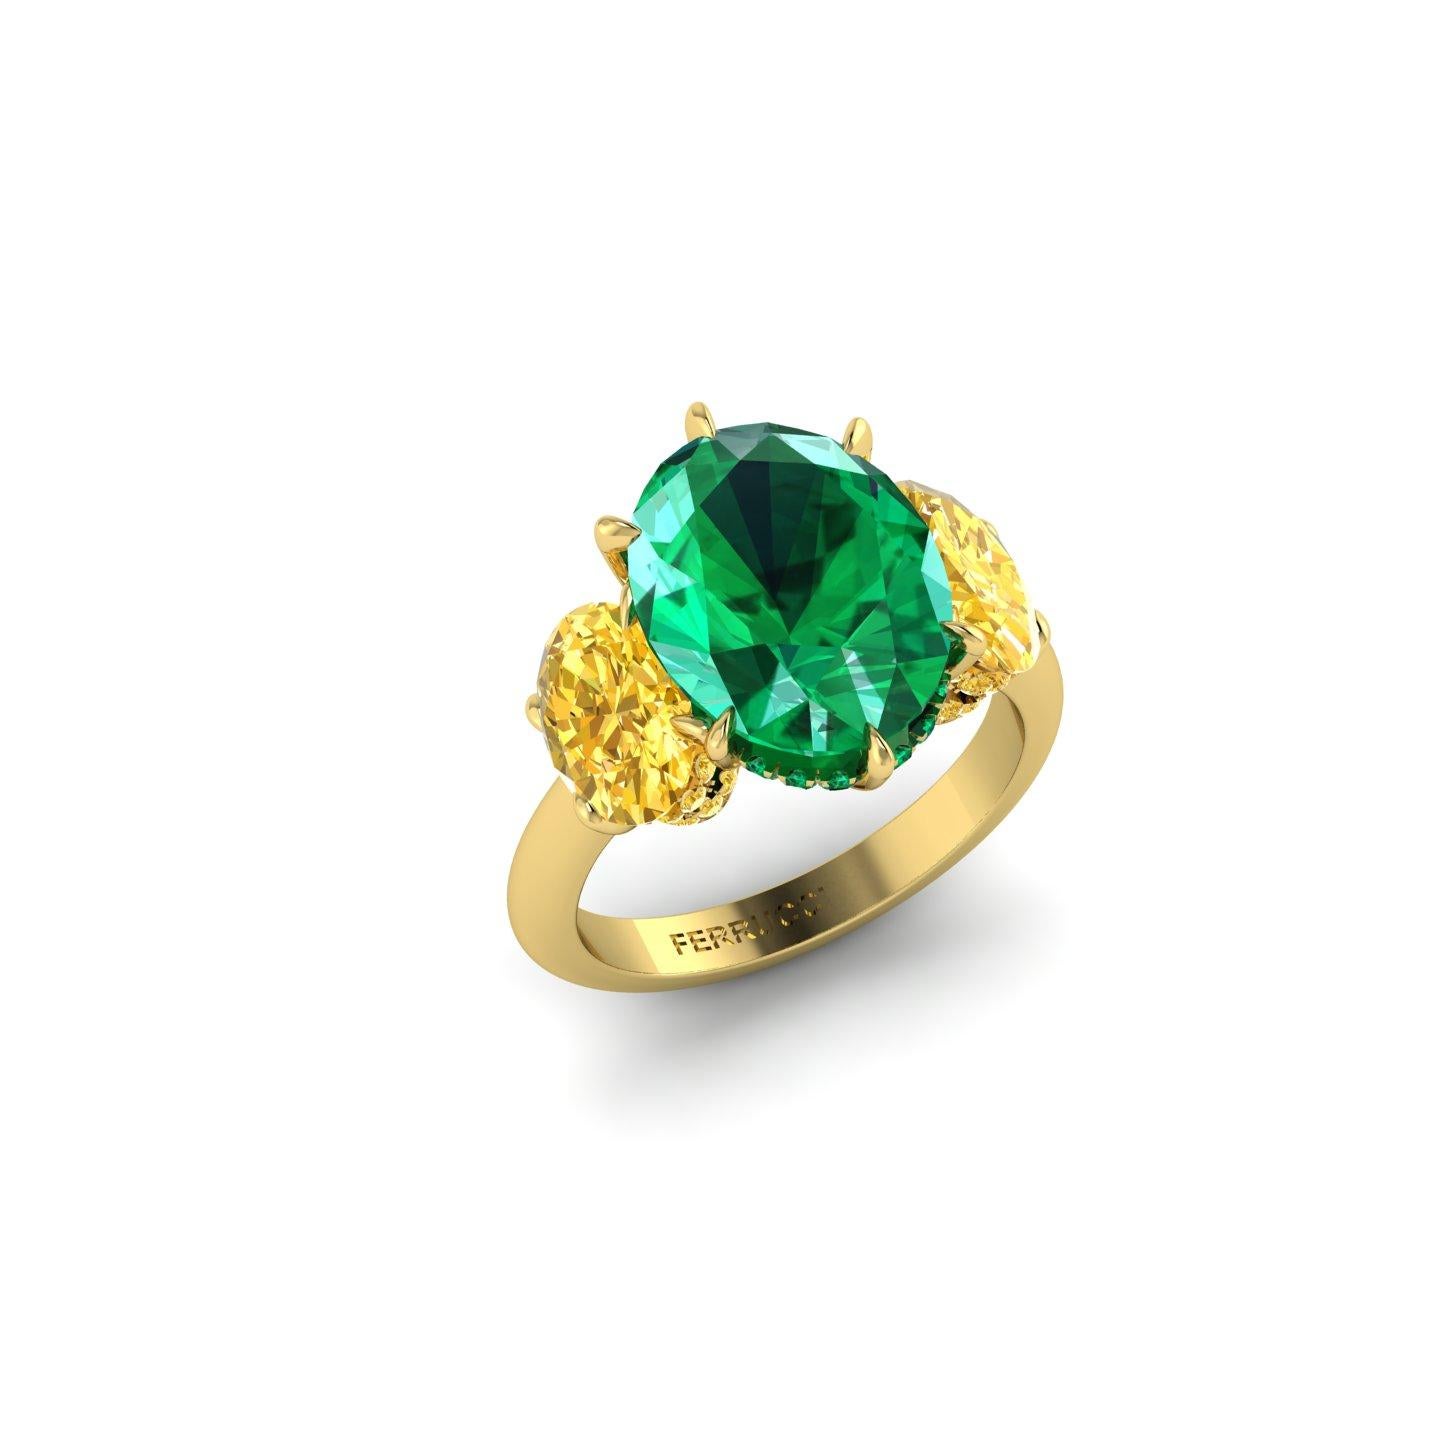 Eye Clean 5.37 carat Oval Emerald, rare beauty, sided by two 1 carat each Vivid Yellow Intense Oval diamonds, GIA Certified, clarity ranging between VVS and VS, rich yellow color, no fluorescence, made in 18k yellow gold, embellished by Pave' set